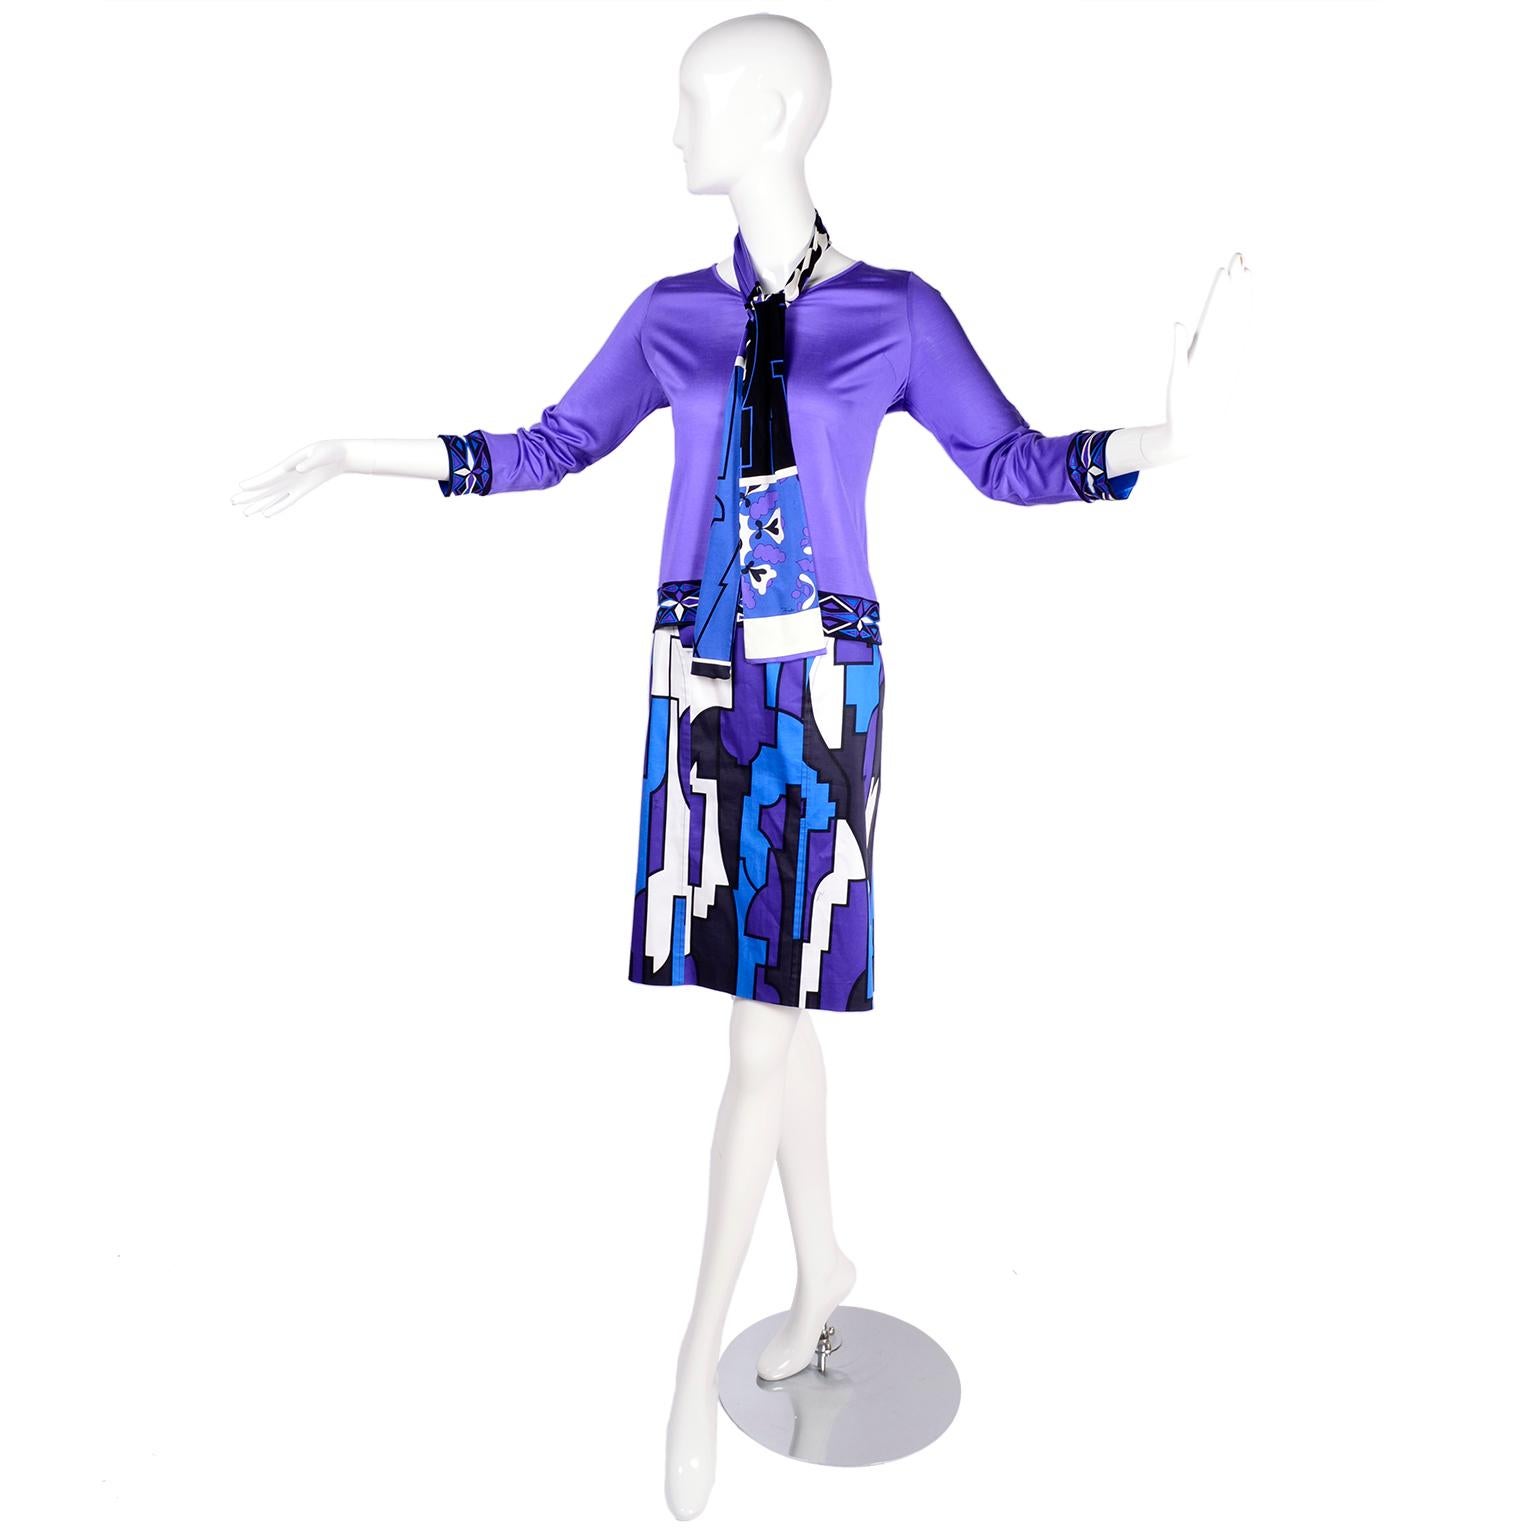 Emilio Pucci Silk Jersey 2 pc Dress Outfit W/ Top Skirt & Coordinating Scarf  6